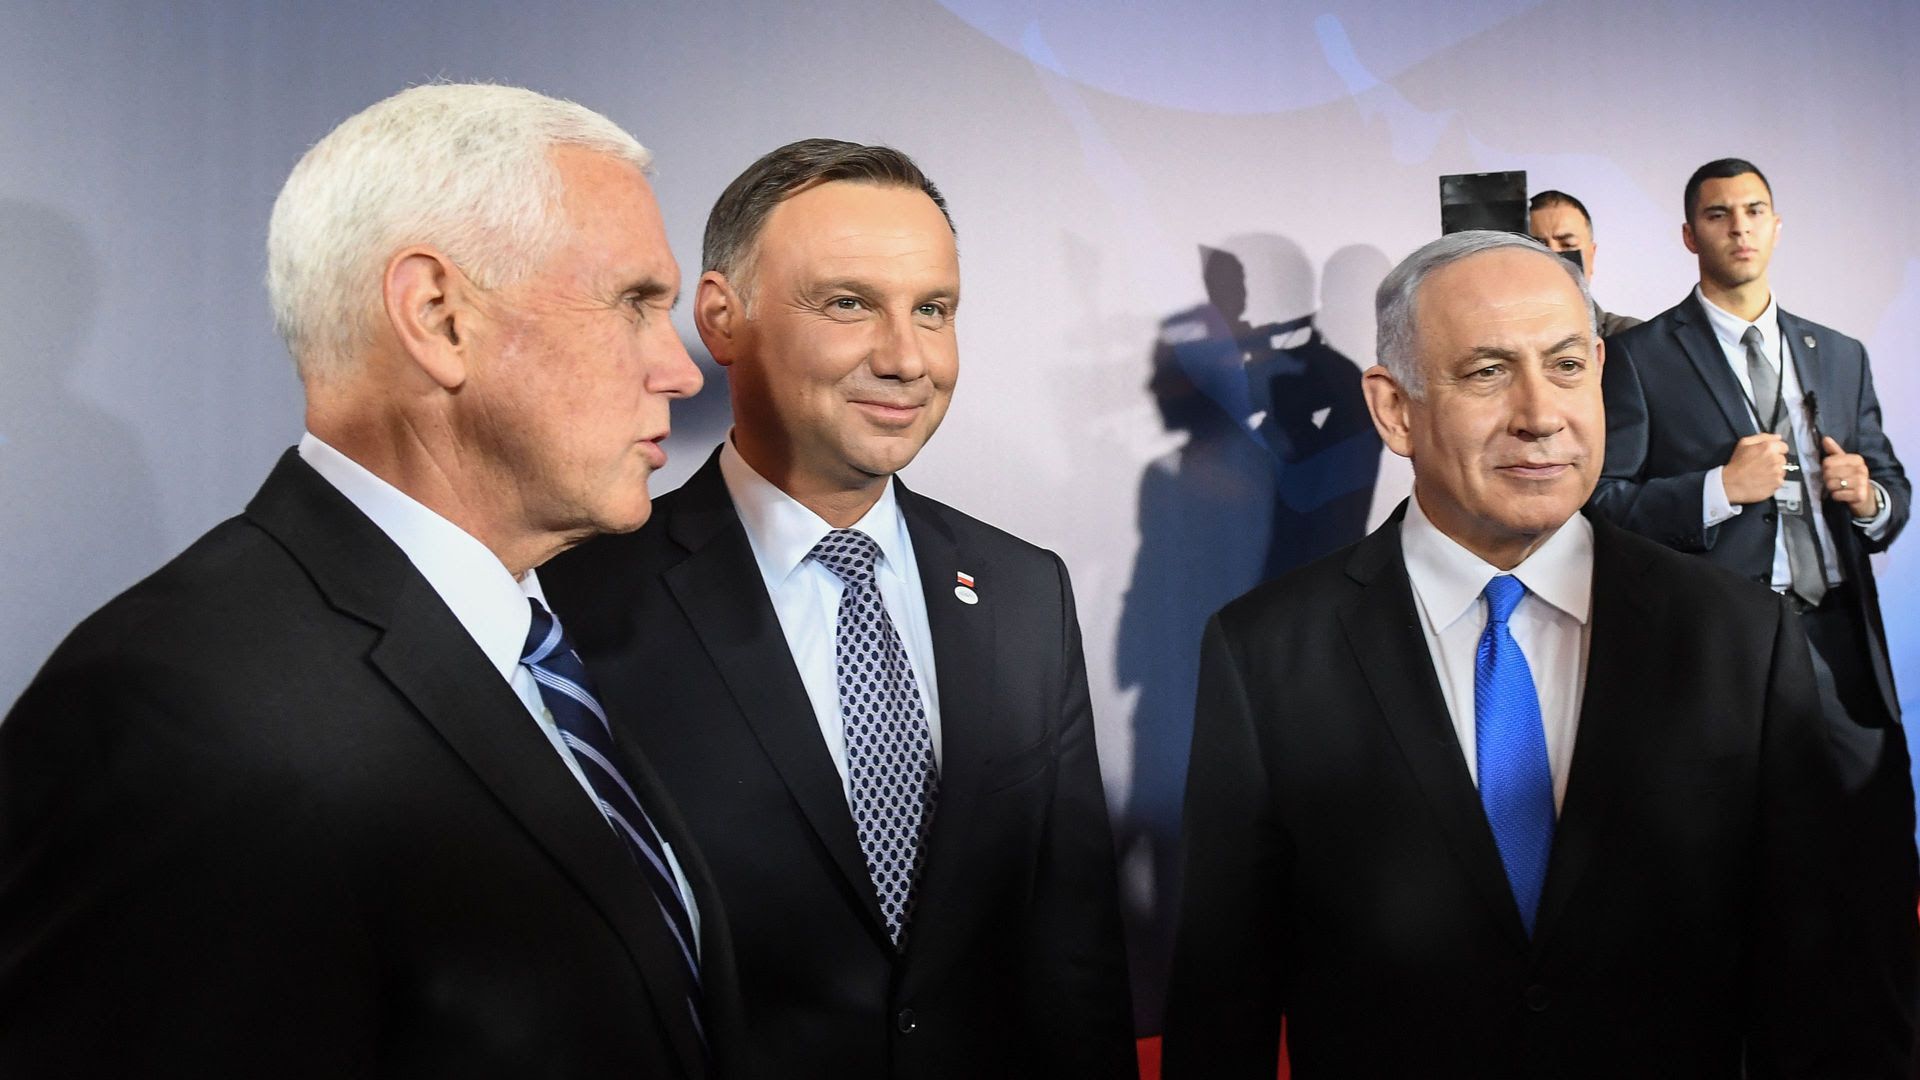 Netanyahu (R) in 2019 with Polish President Andrzej Duda (C) and then-Vice President Mike Pence. Photo: Janek Skarzynski/AFP via Getty Images